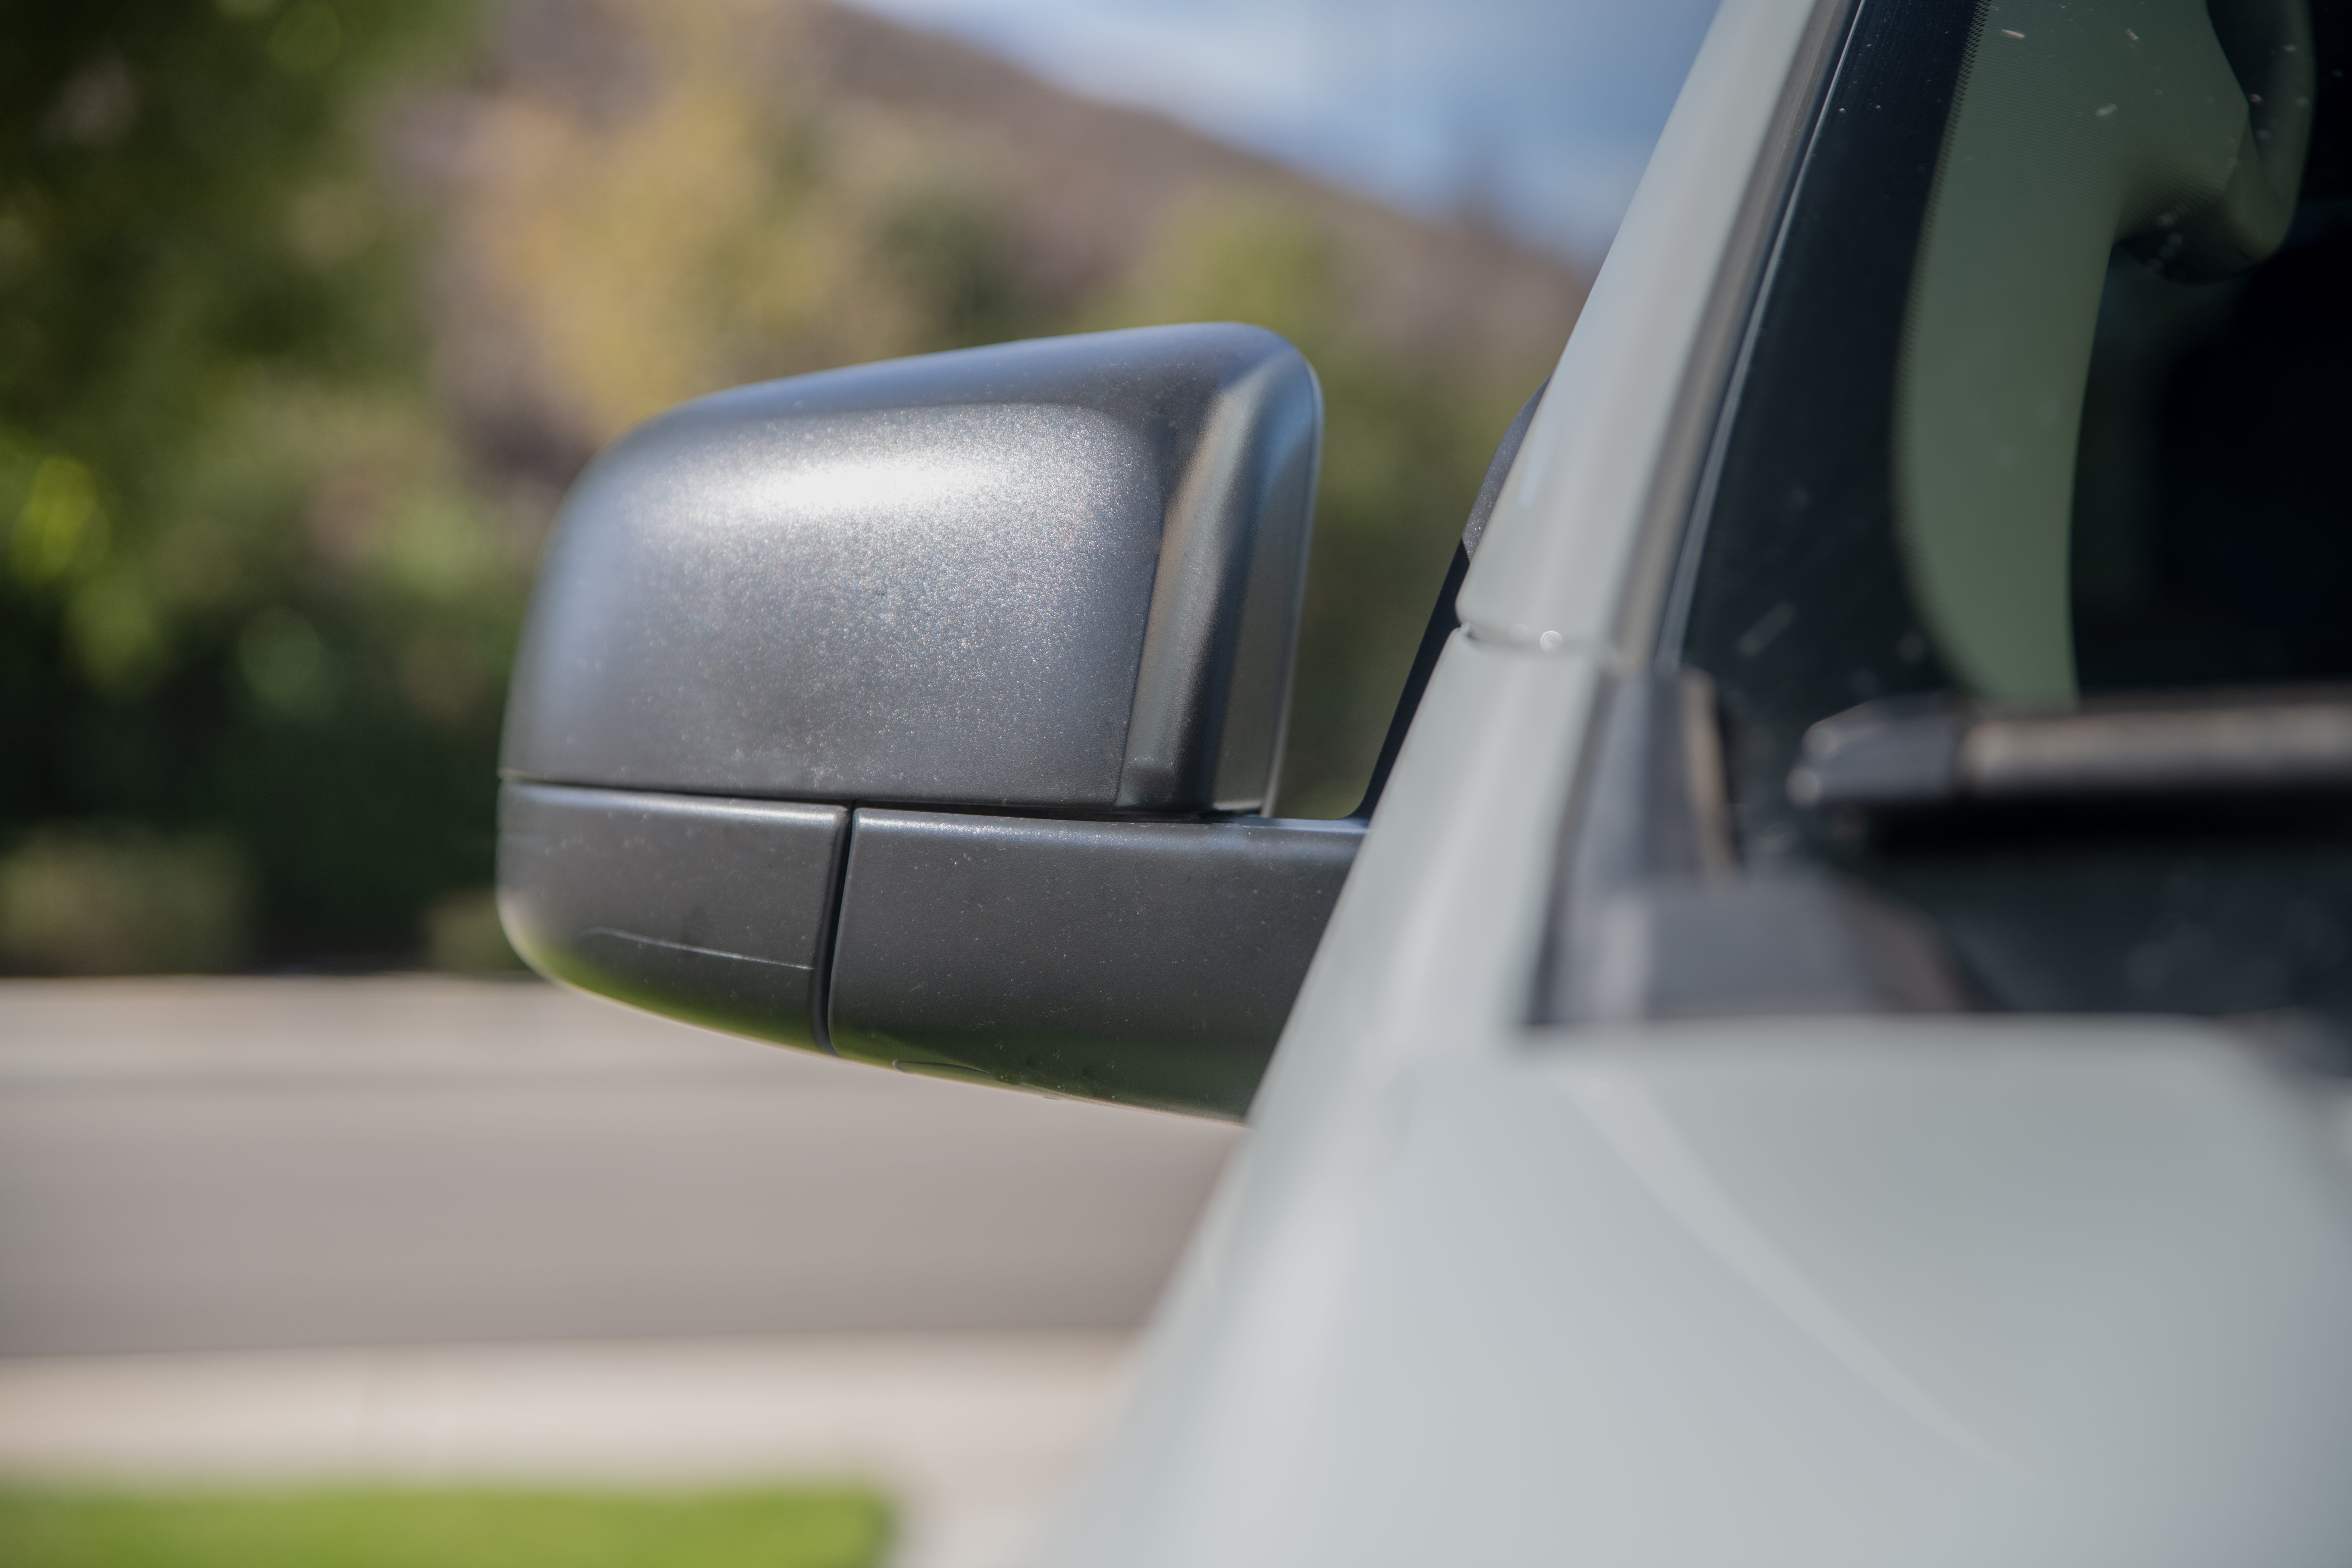 Car Mirrors: Your Ultimate Guide